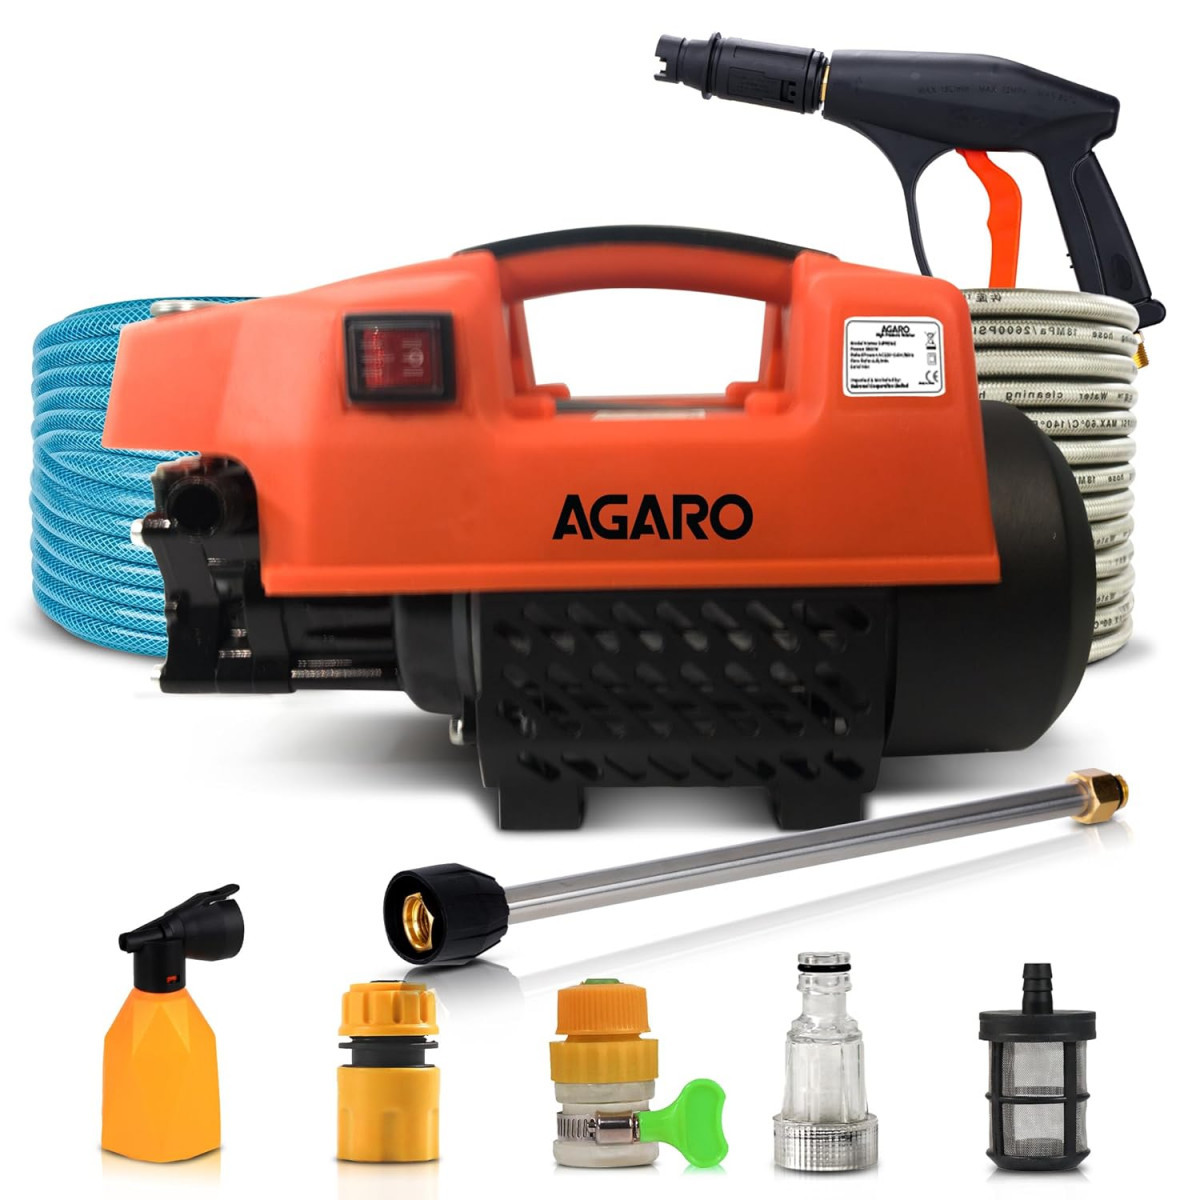 AGARO Supreme High Pressure Washer Car Washer 1800 Watts Motor 120 Bars 65LMin Flow Rate 8 Meters Outlet Hose Portable Car Bike  Home Cleaning Black and Orange